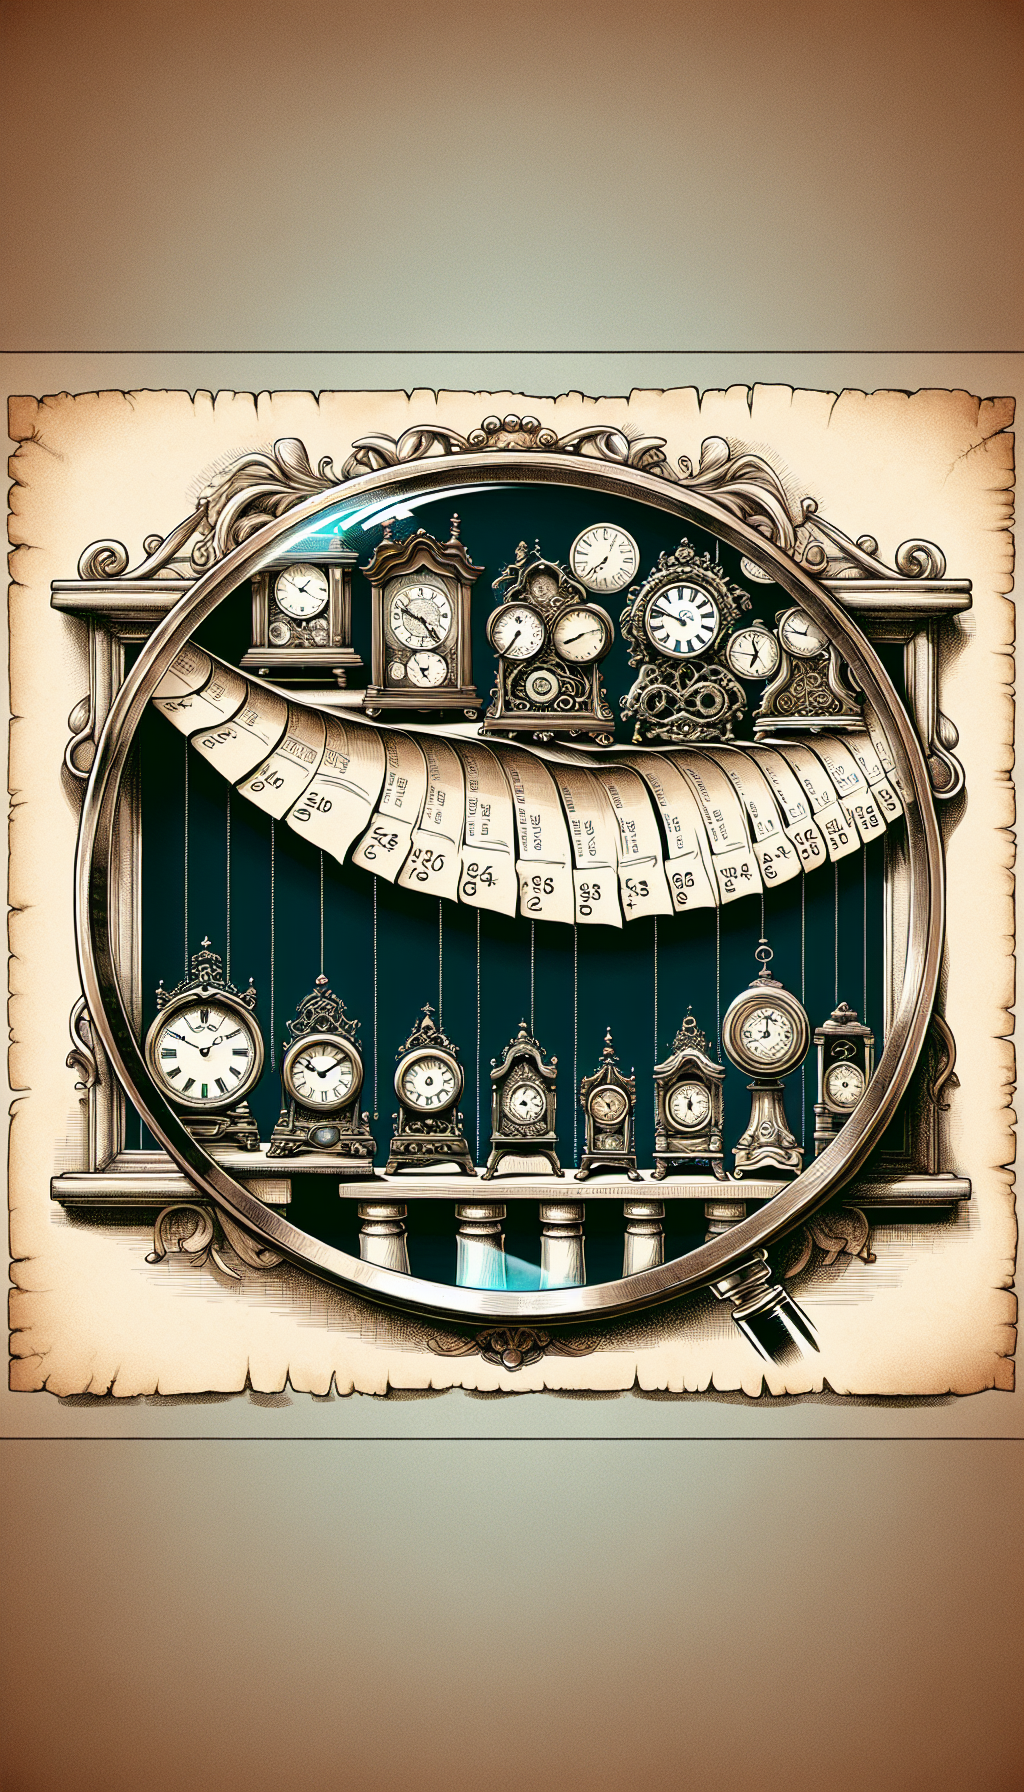 A whimsical illustration depicts an array of ornate antique mantel clocks, each perched atop a timeline unfurled like a parchment scroll. The clocks morph in style from left to right, signifying their progression through eras, while a magnifying glass hovers above, revealing price tags beneath to symbolize their value. A victorian-esque frame encapsulates the entire scene, further emphasizing timeless elegance.